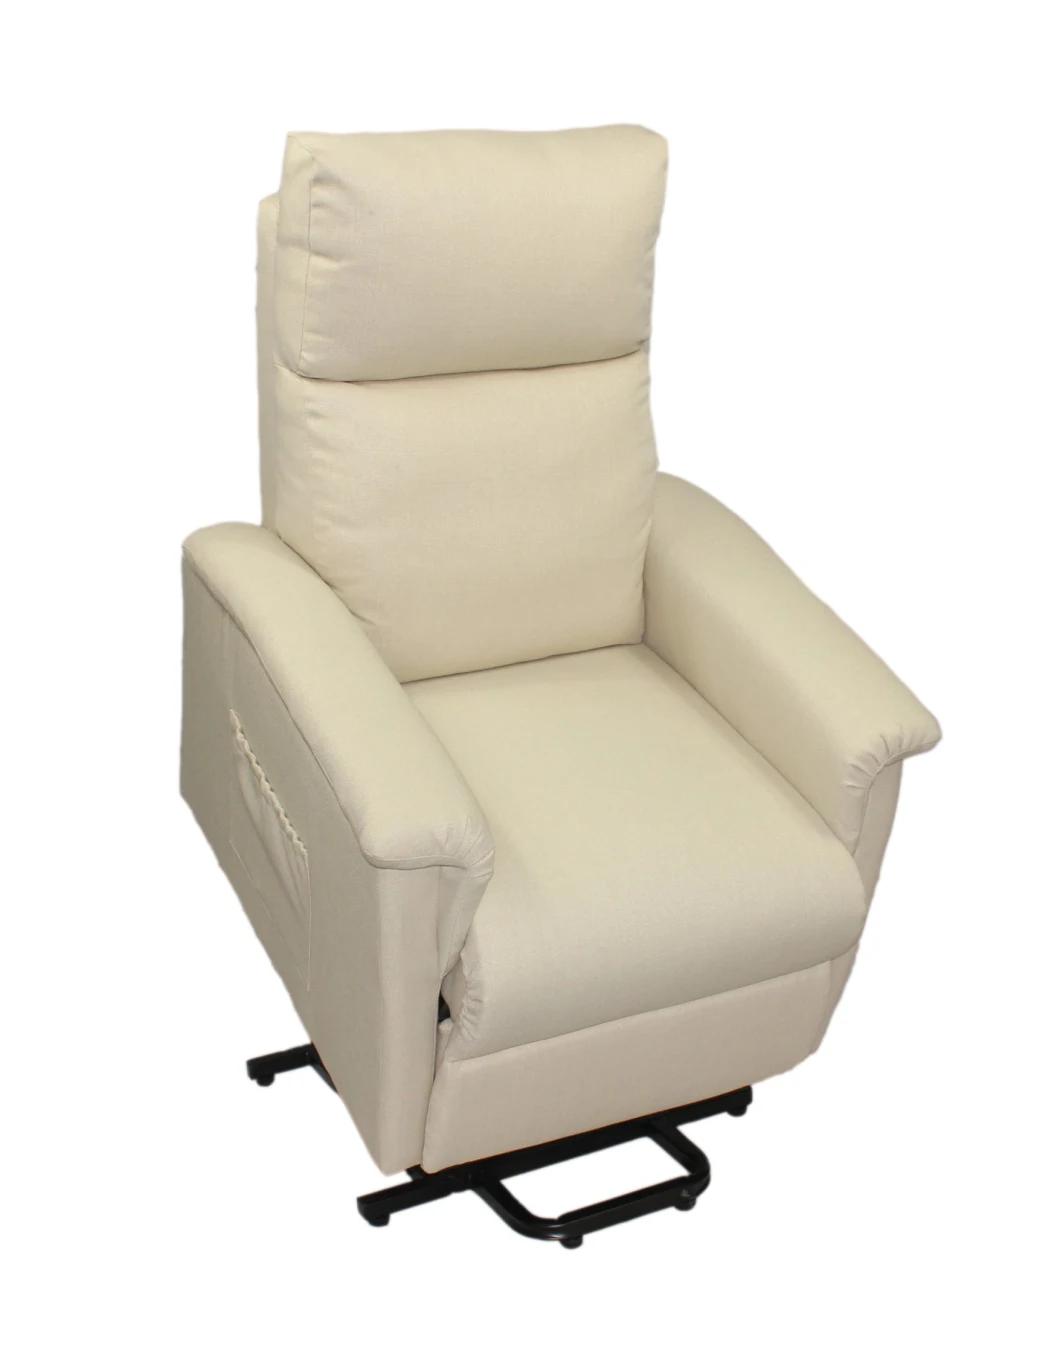 Helping Rising up Lift Chair with Massage (QT-LC-64)